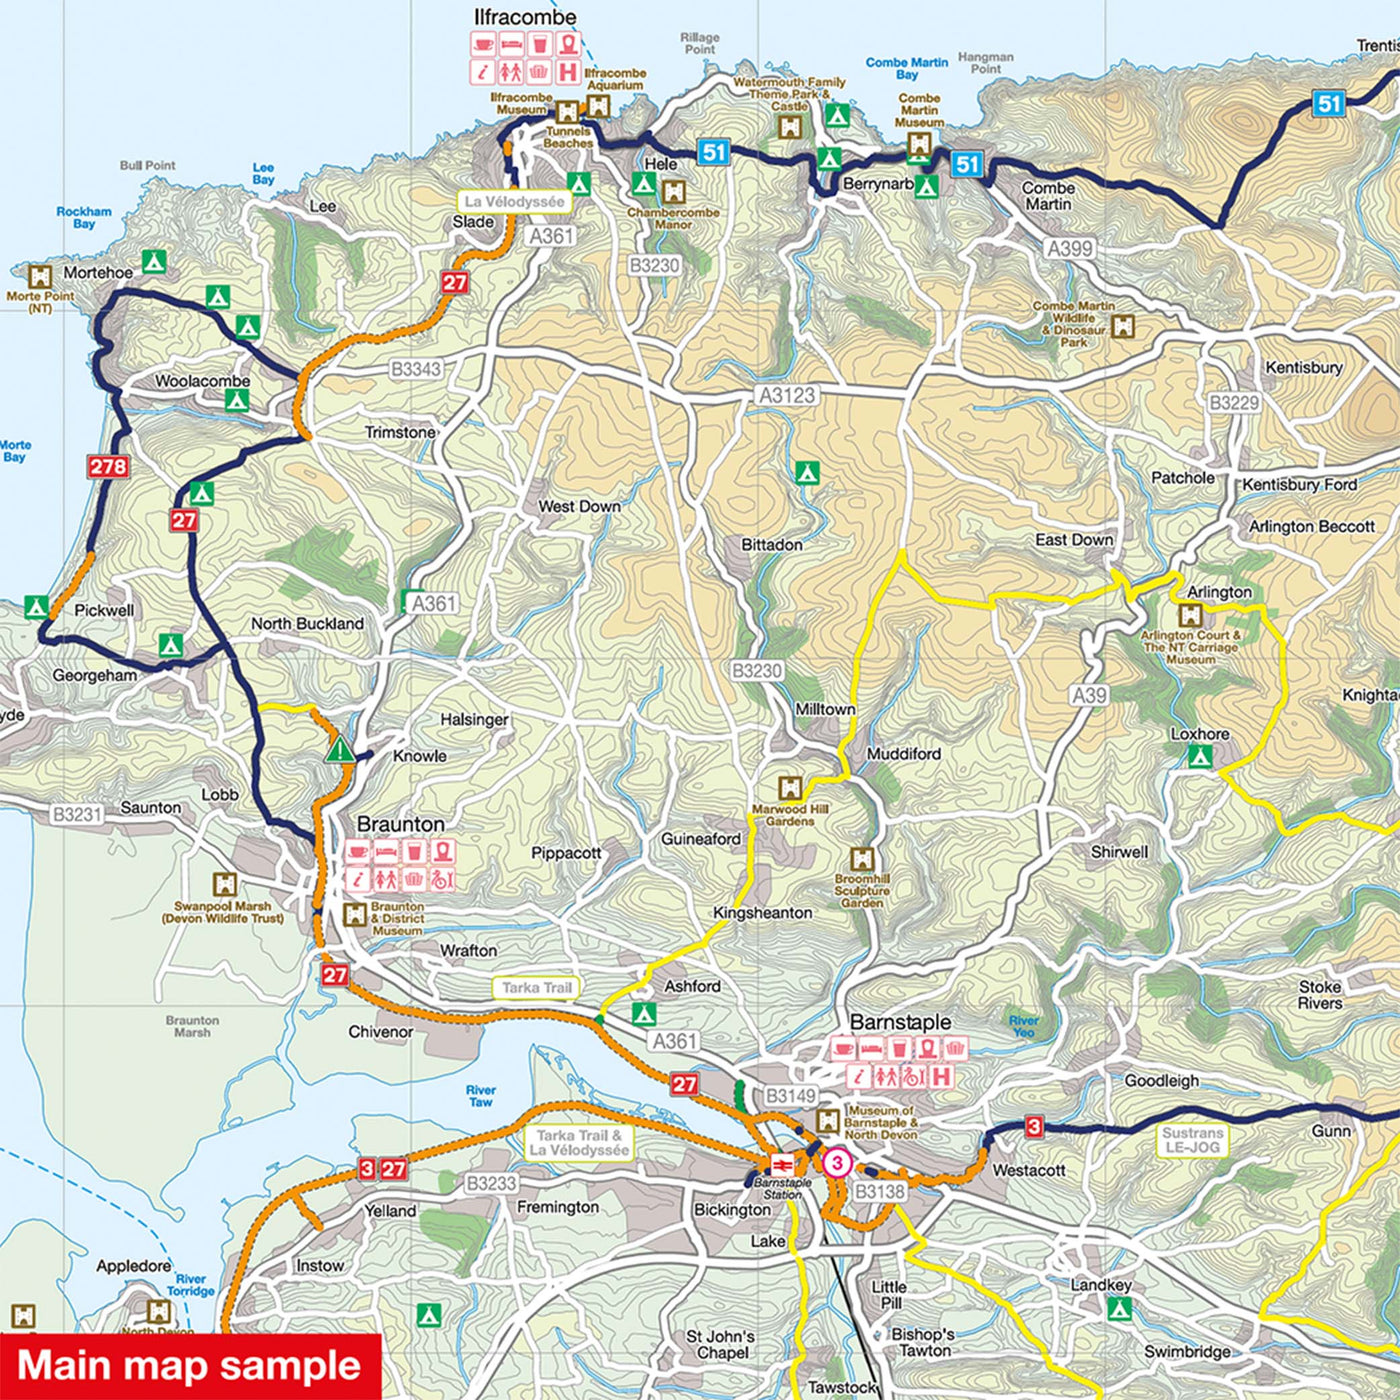 South Devon cycle map. Main map sample: Ilfracombe and Barnstaple